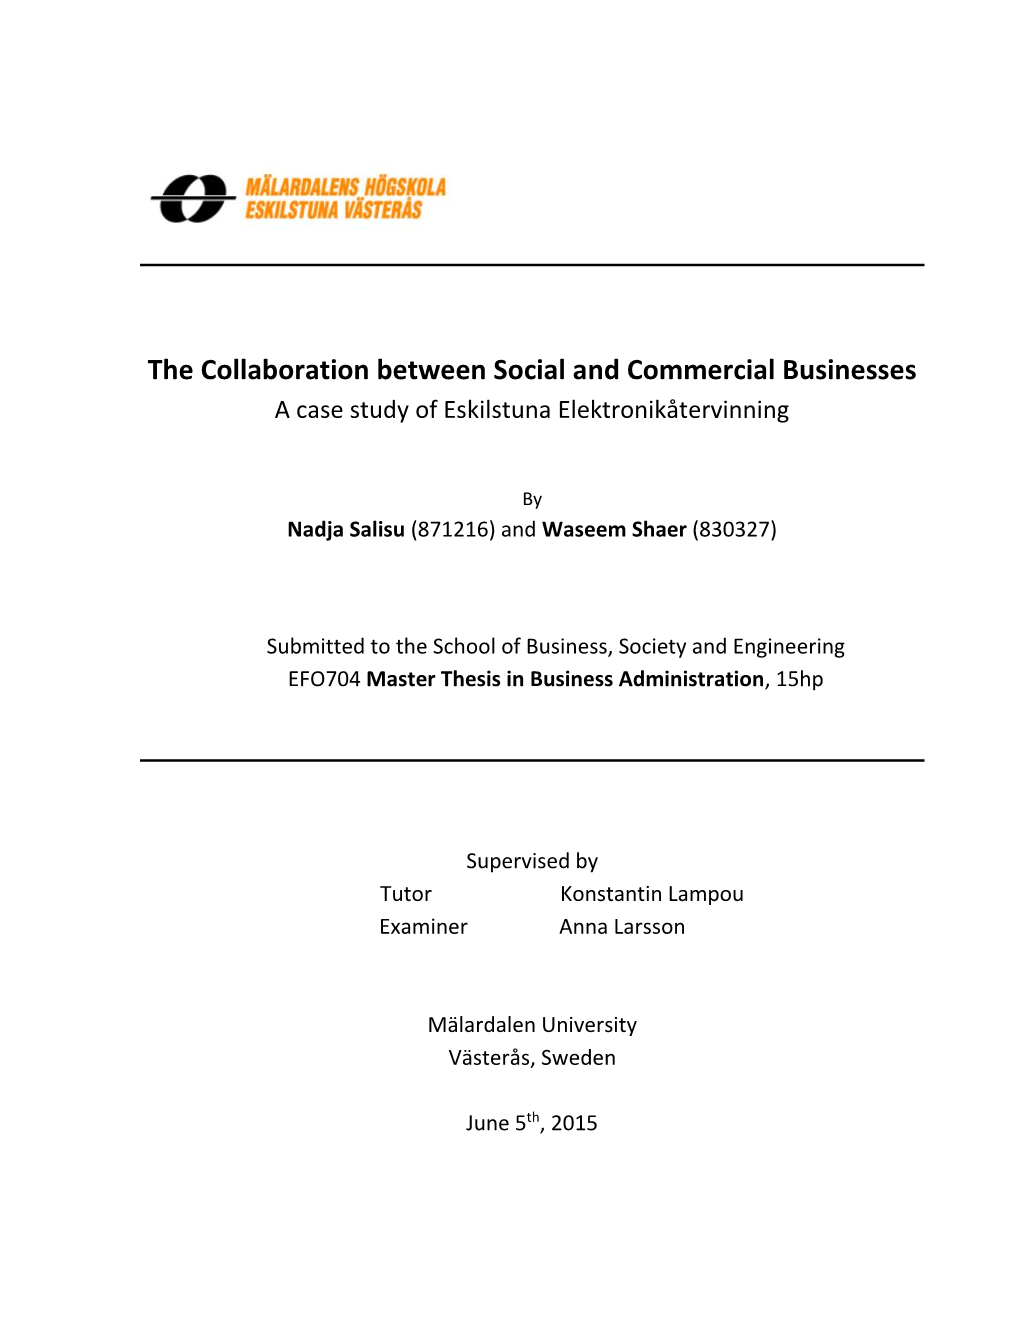 The Collaboration Between Social and Commercial Businesses a Case Study of Eskilstuna Elektronikåtervinning